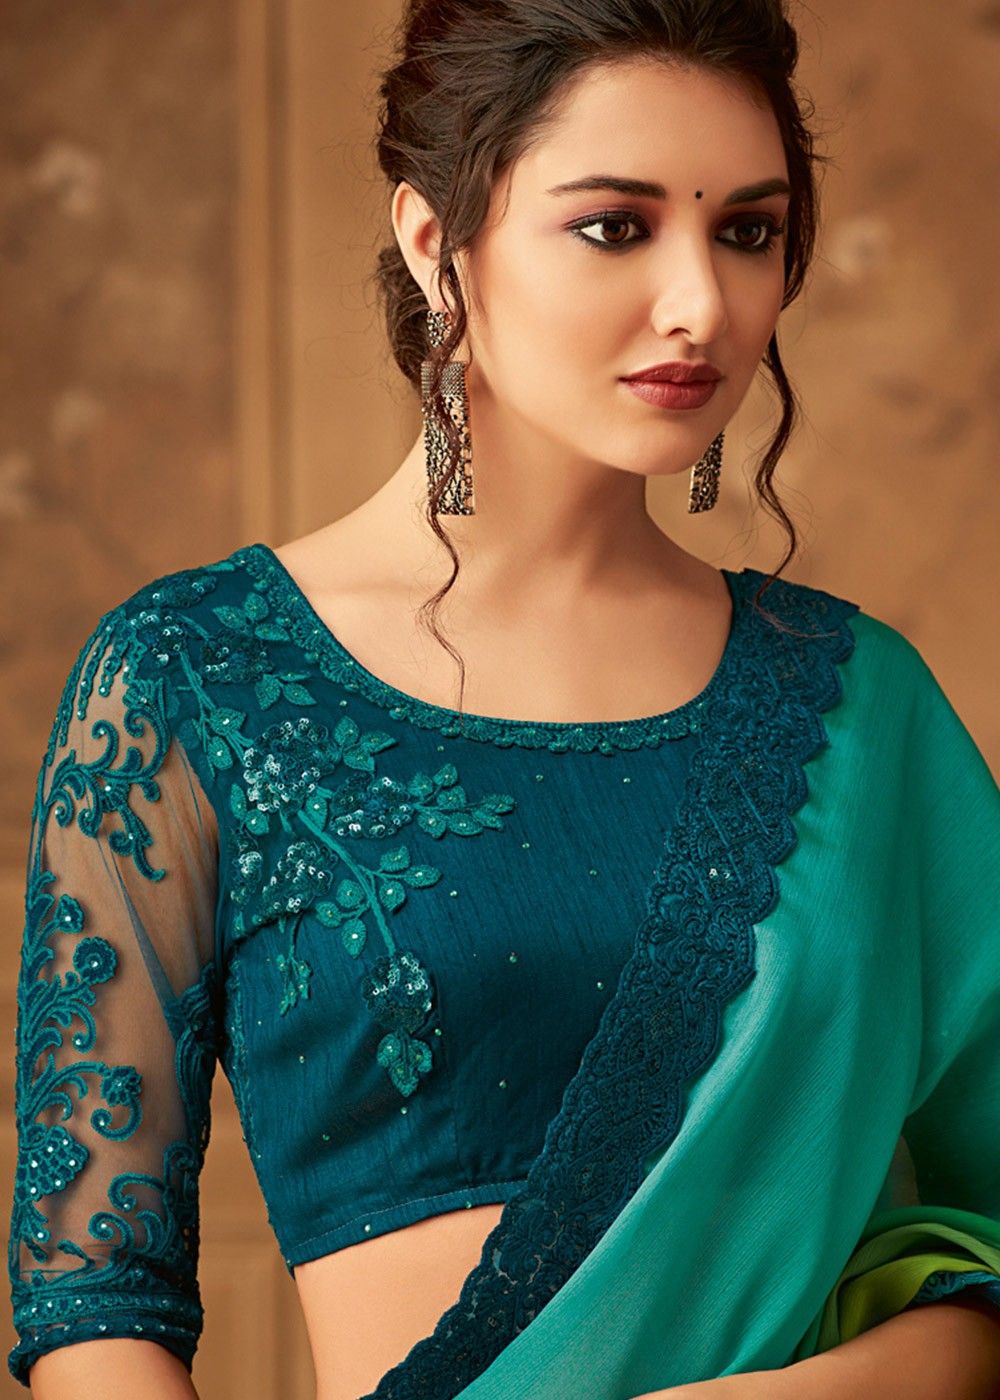 Shaded Green Chiffon Saree With Embroidered Blouse Saree 2395SR18